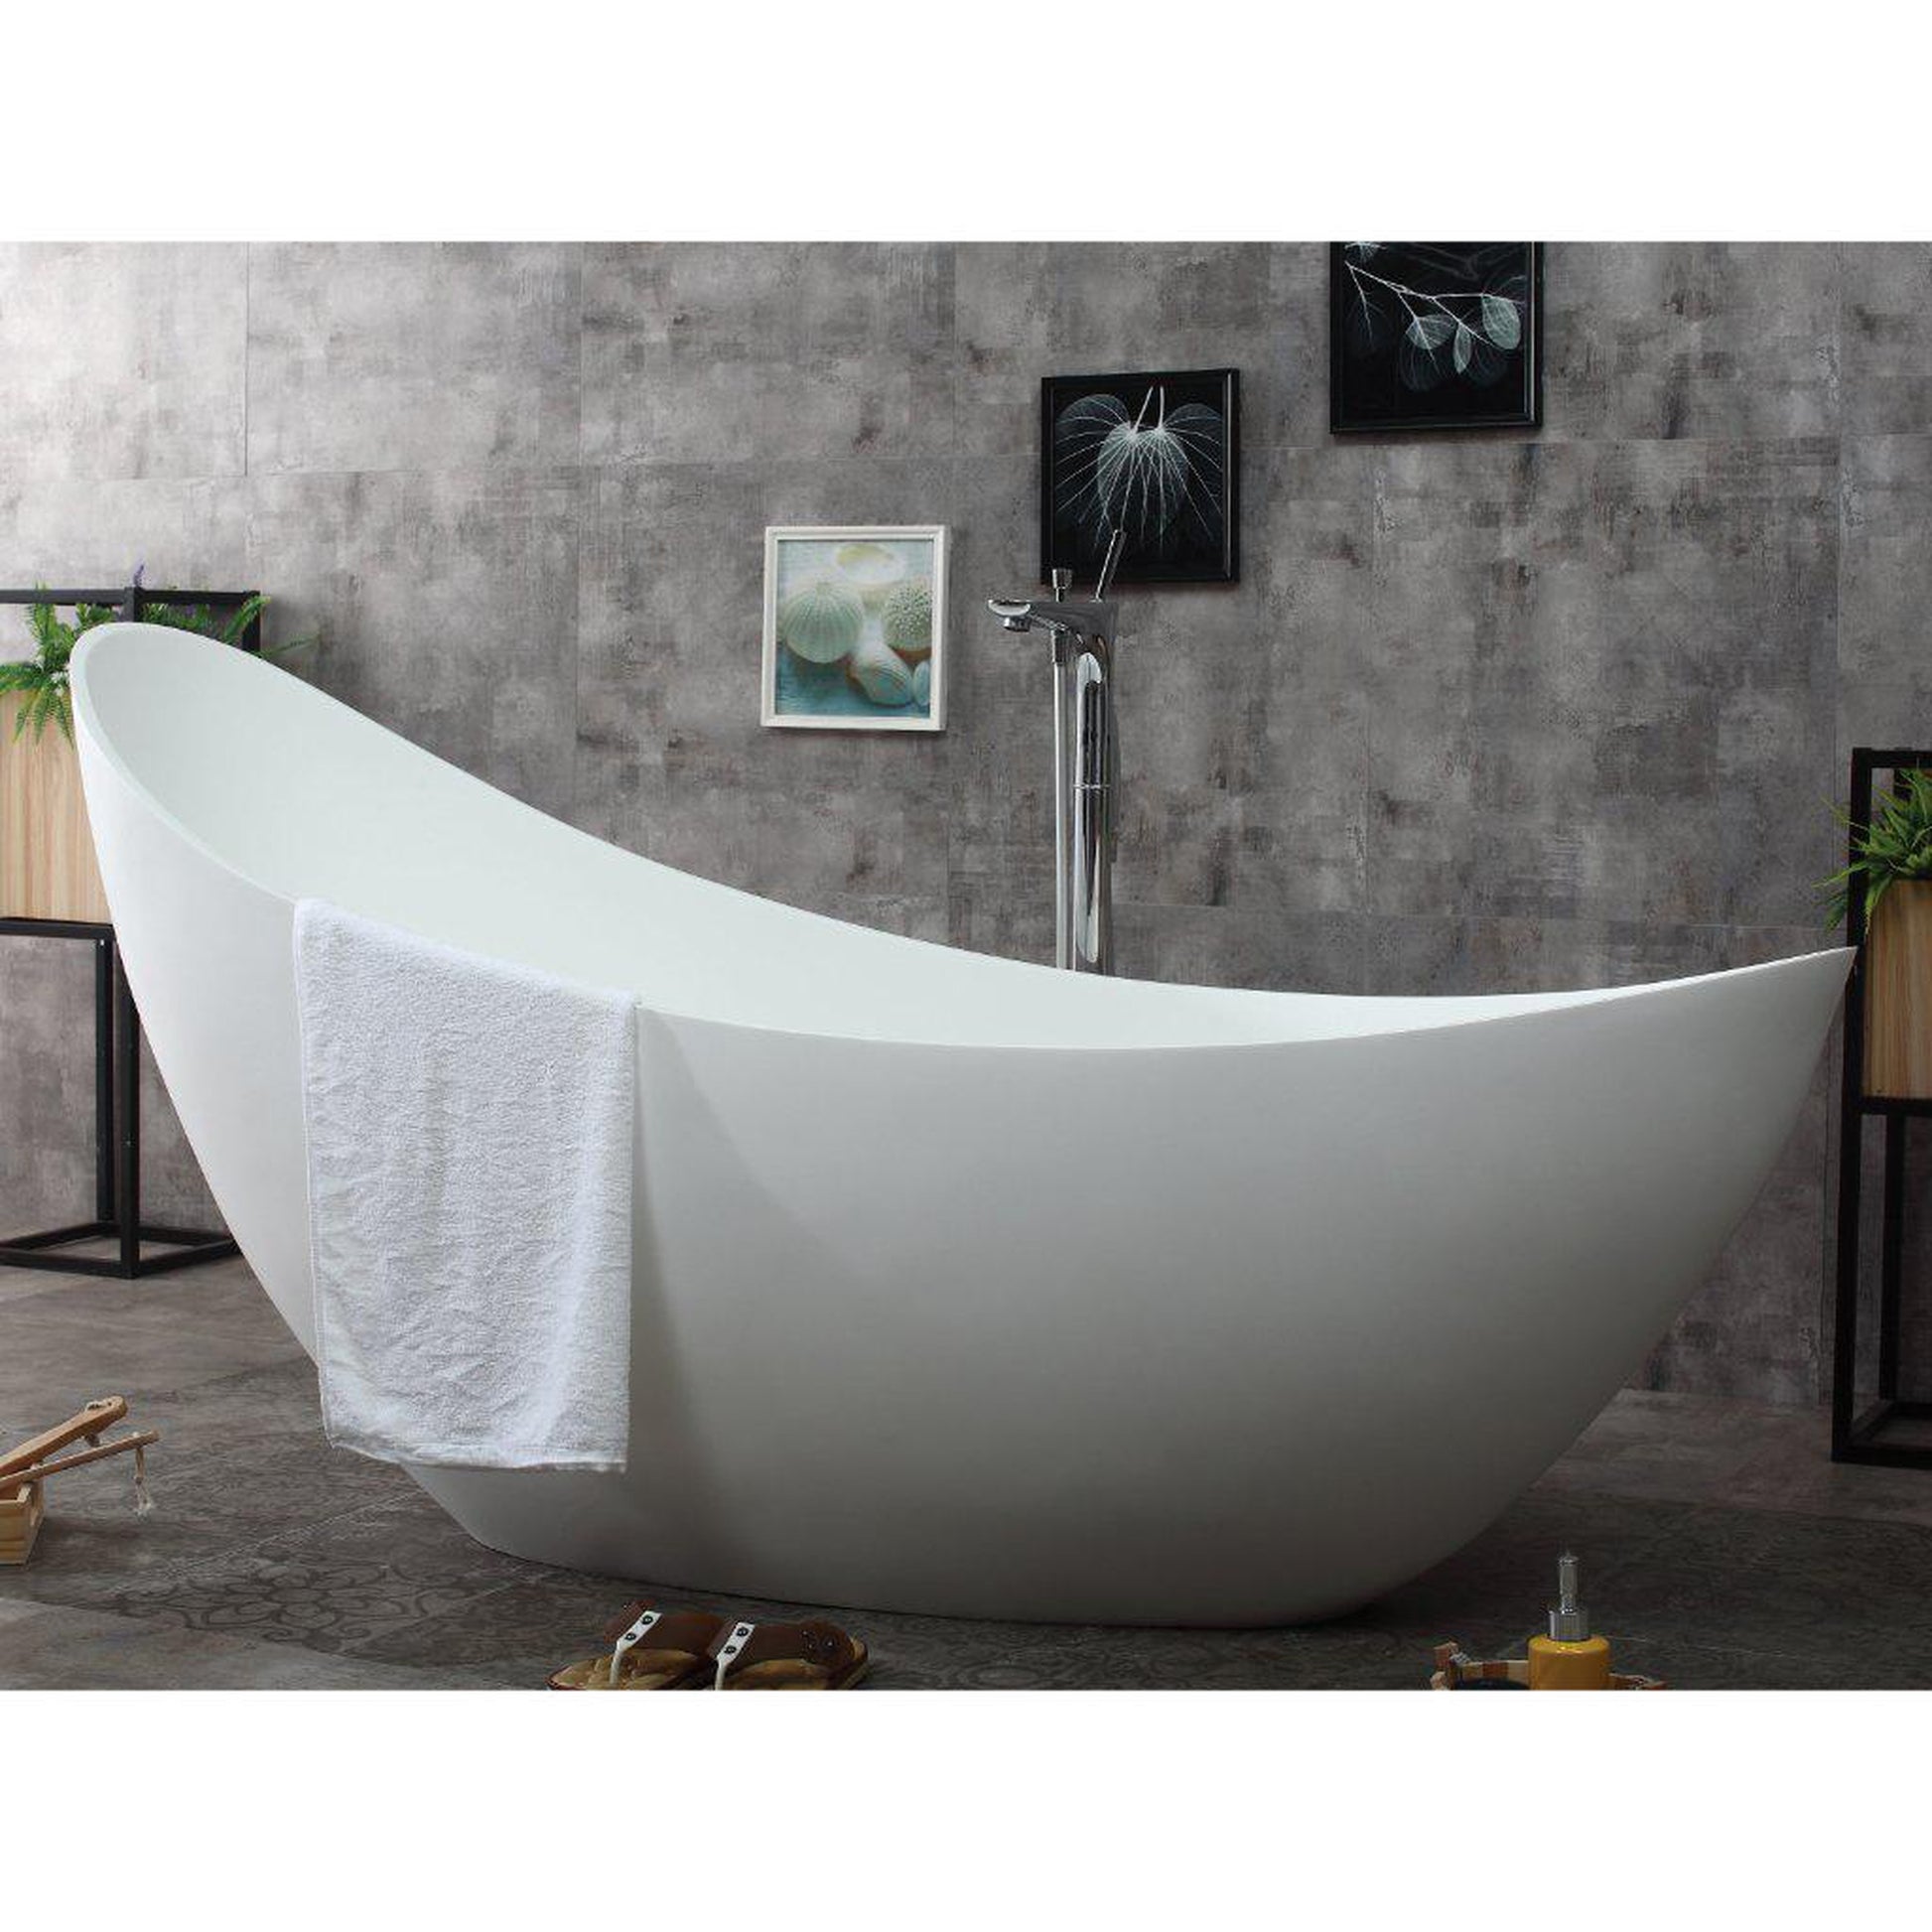 ALFI Brand AB9951 73" One Person Freestanding White Solid Surface Smooth Resin Soaking Slipper Bathtub